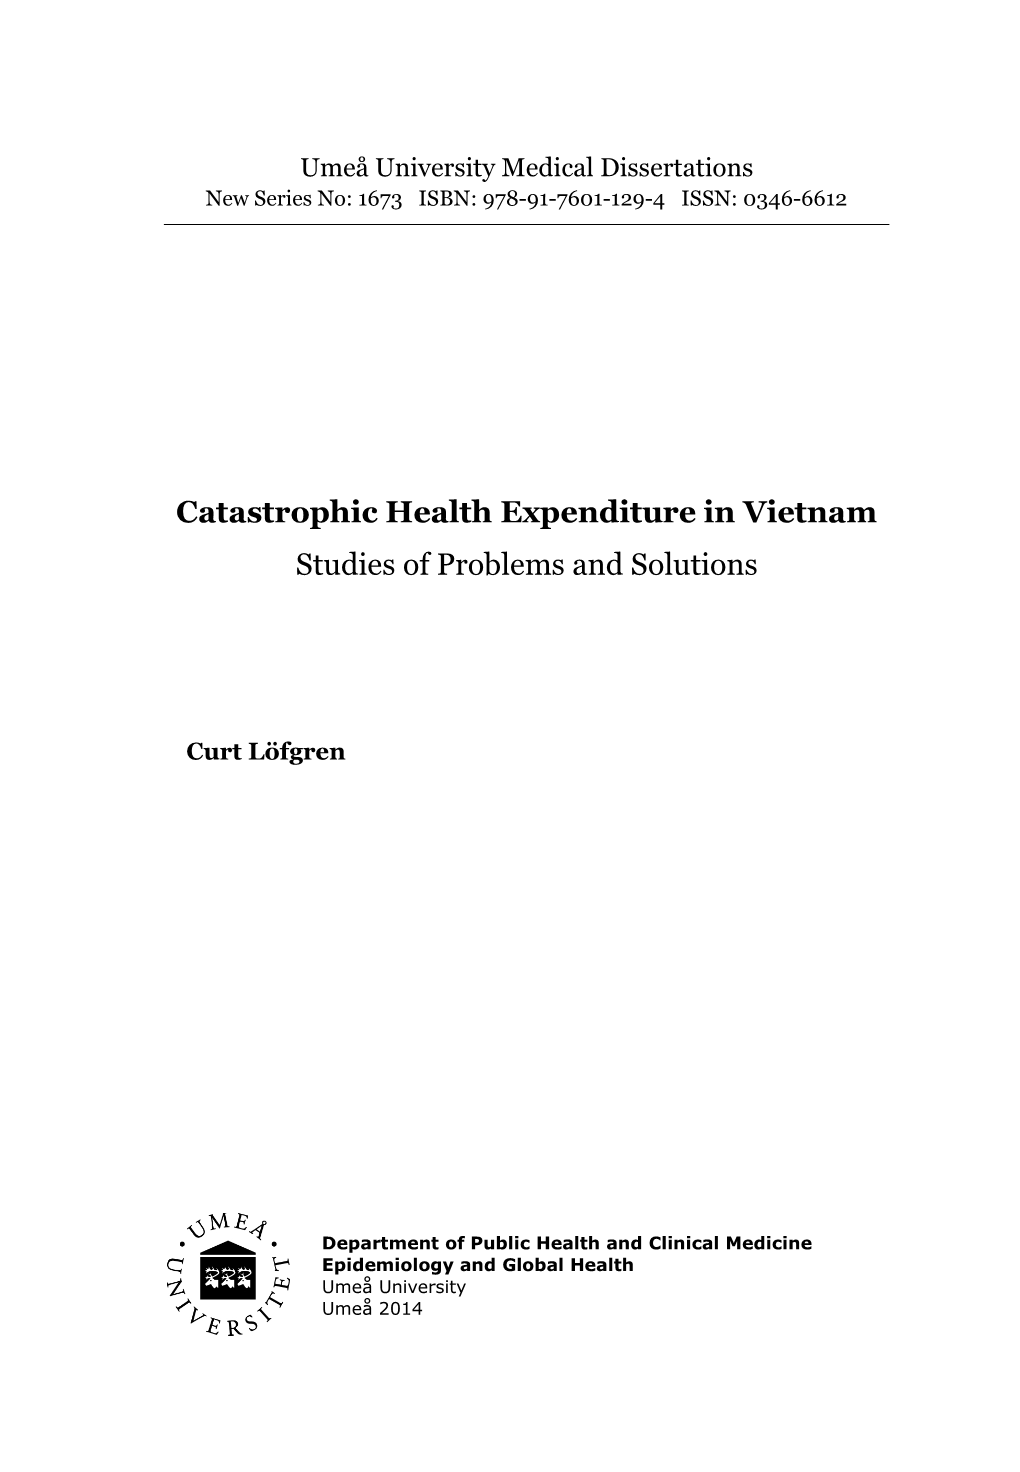 Catastrophic Health Expenditure in Vietnam Studies of Problems and Solutions